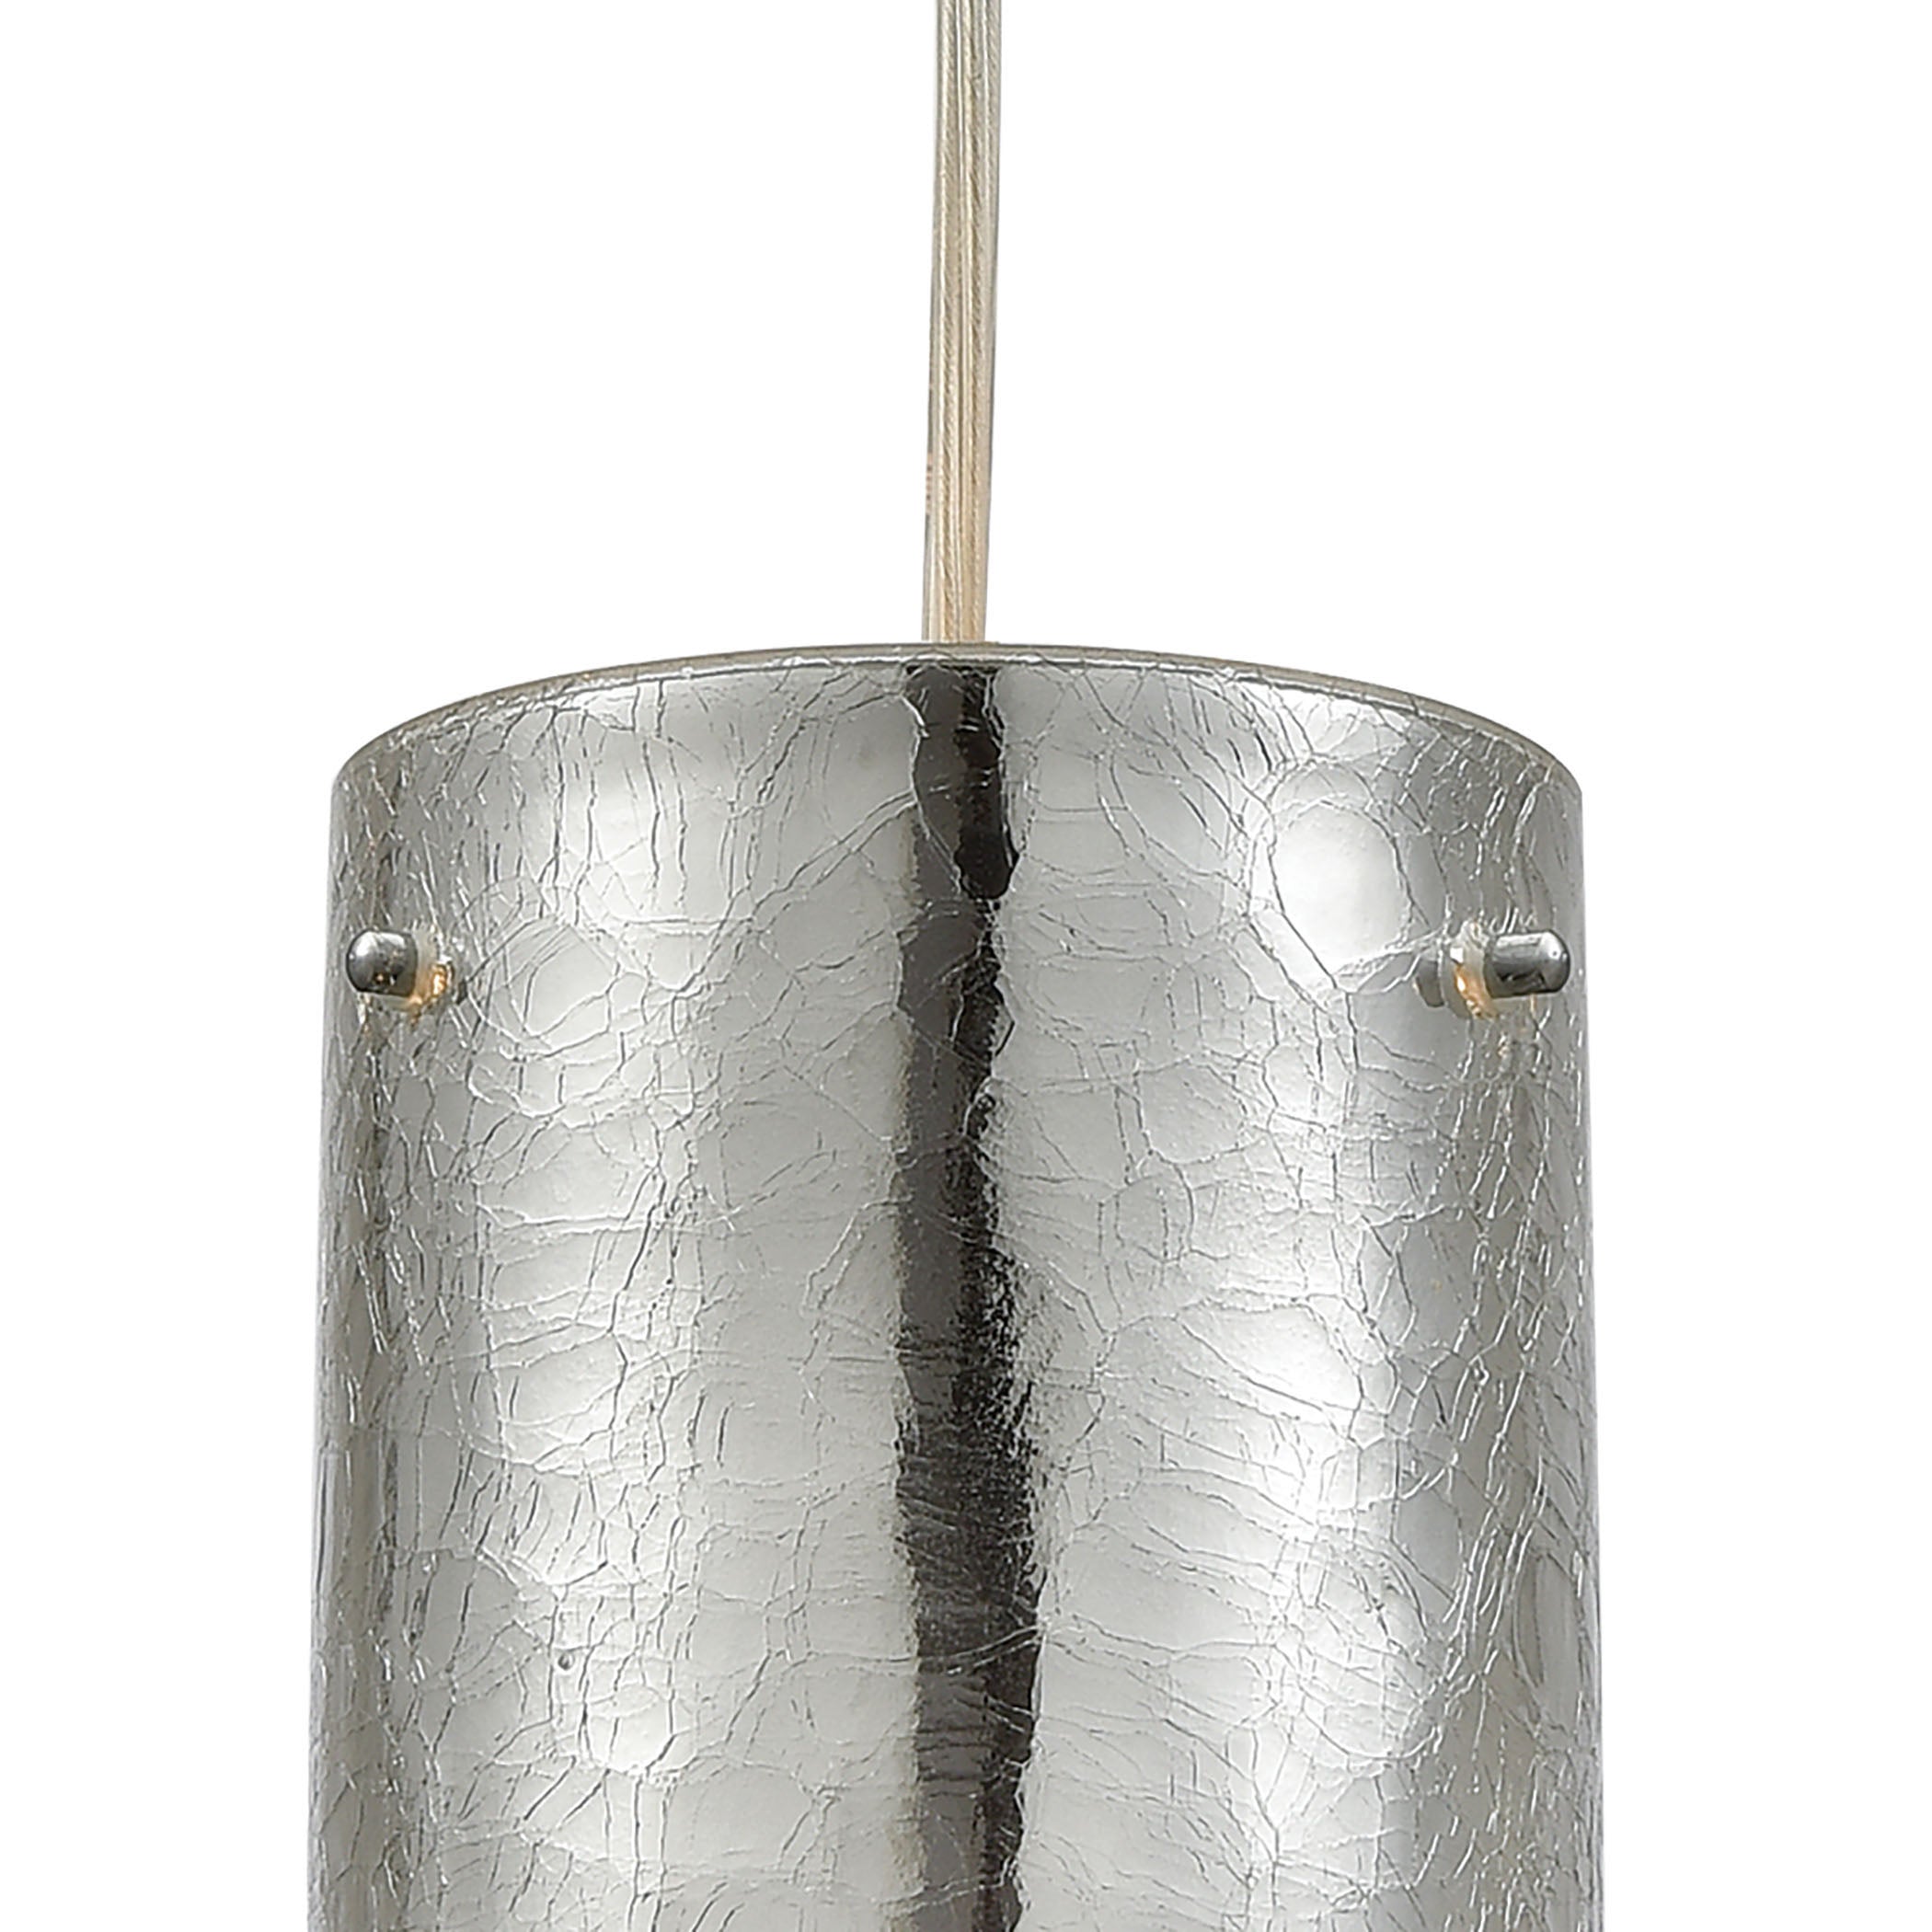 ELK Lighting 10570/1 Tallula 1-Light Mini Pendant in Chrome with Chrome-plated and Clear Crackle Glass